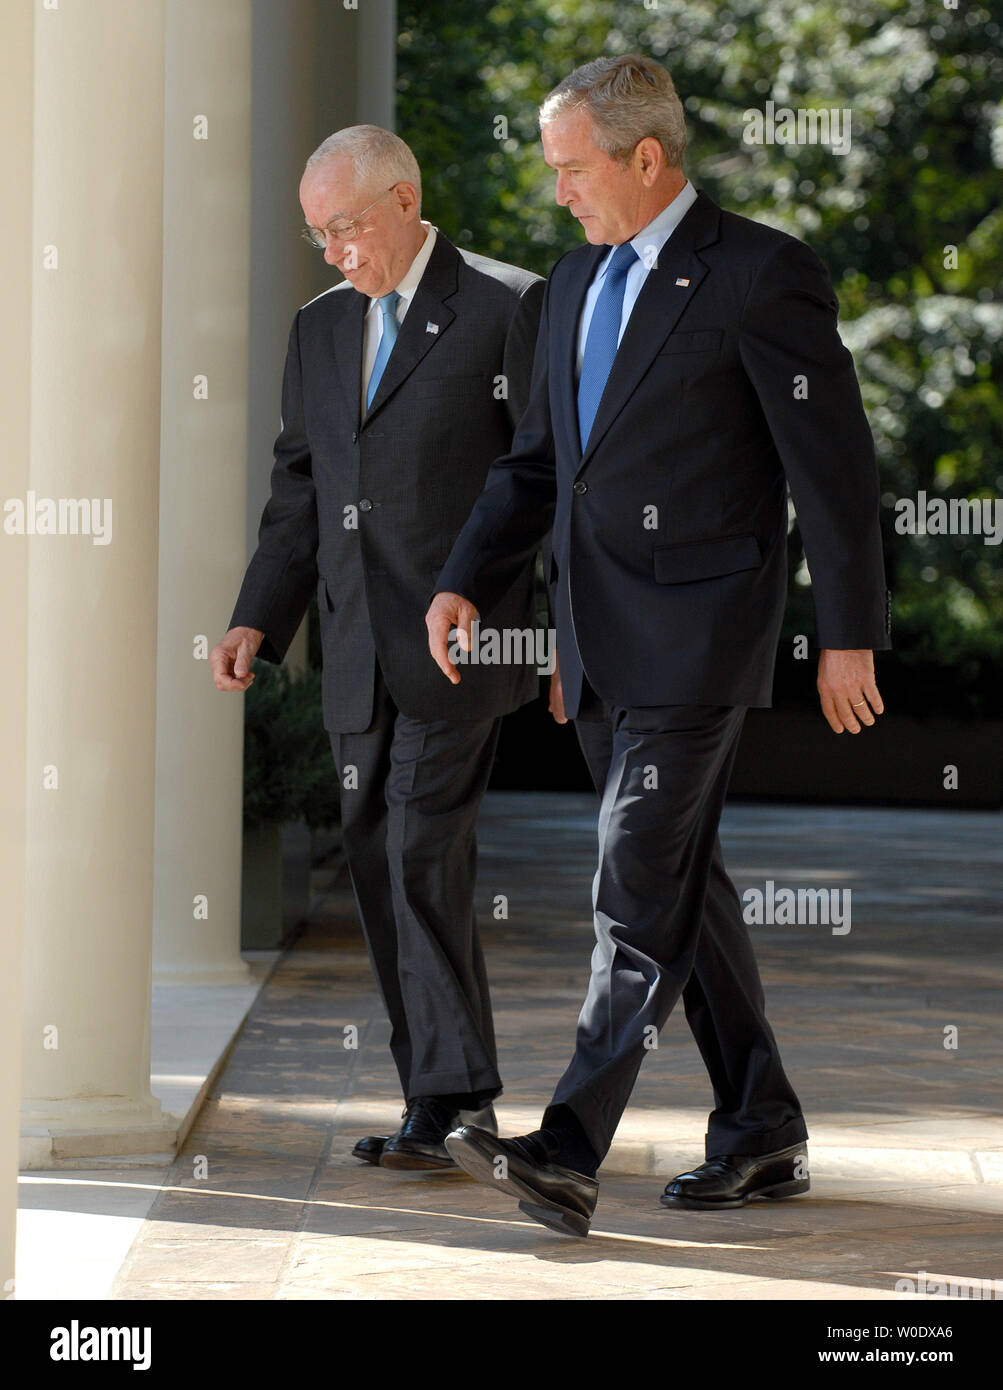 U.S. President George W. Bush (R) walks with Michael B. Mukasey, a retired federal judge from New York, through the Colonnade of the Rose Garden at the White House  on September 17, 2007. Bush announced Mukasey as his nominee to replace Alberto Gonzales as attorney general.   (UPI Photo/Roger L. Wollenberg) Stock Photo